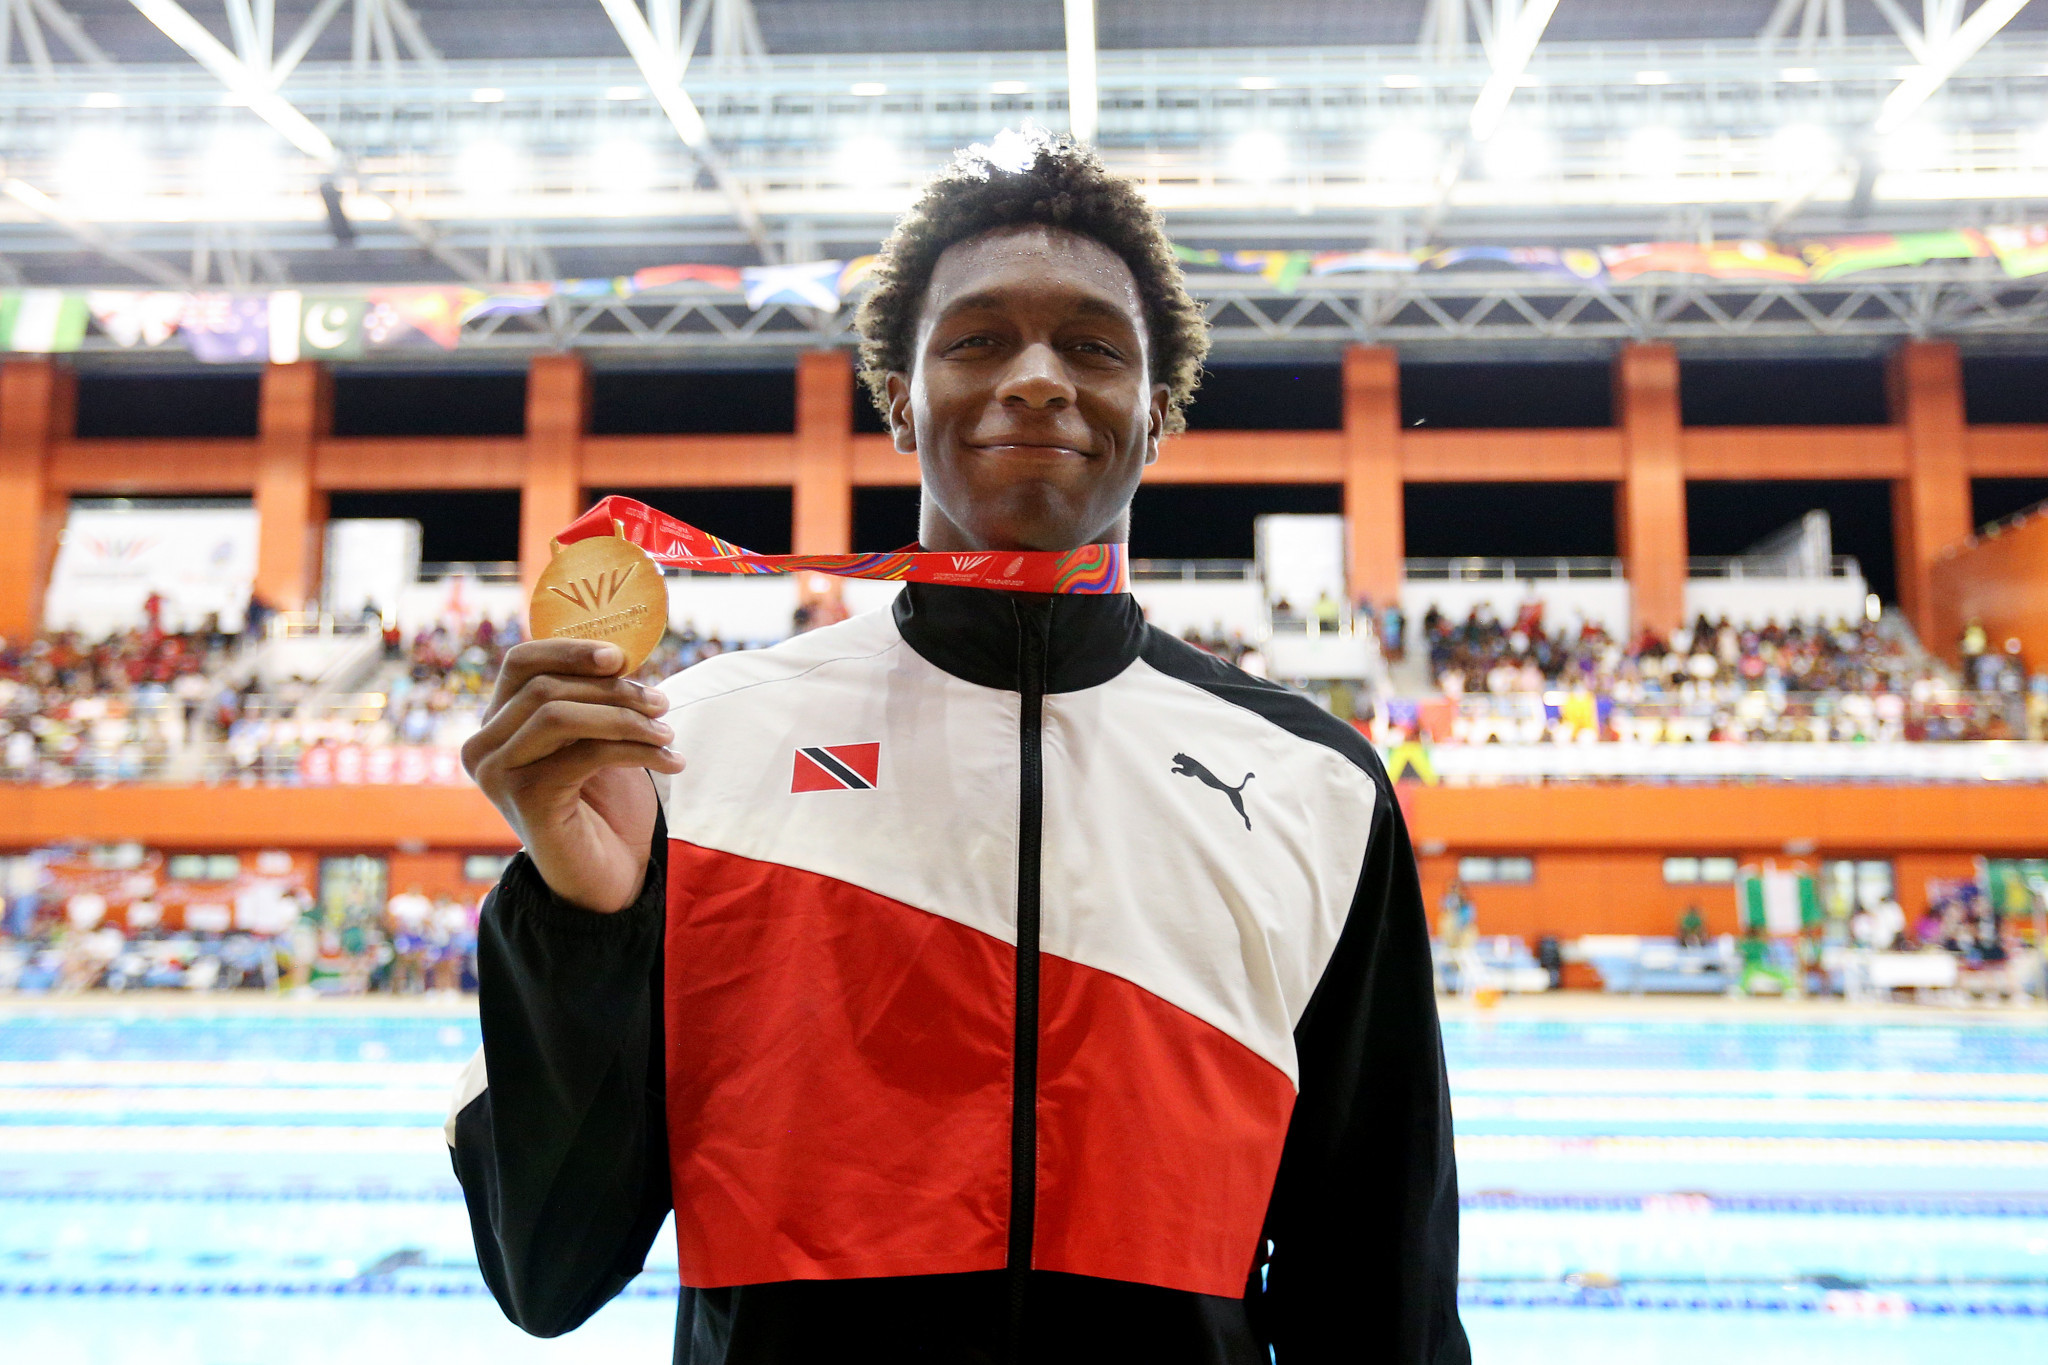 Swimmer Blackman provides hosts Trinidad and Tobago's first gold of Commonwealth Youth Games